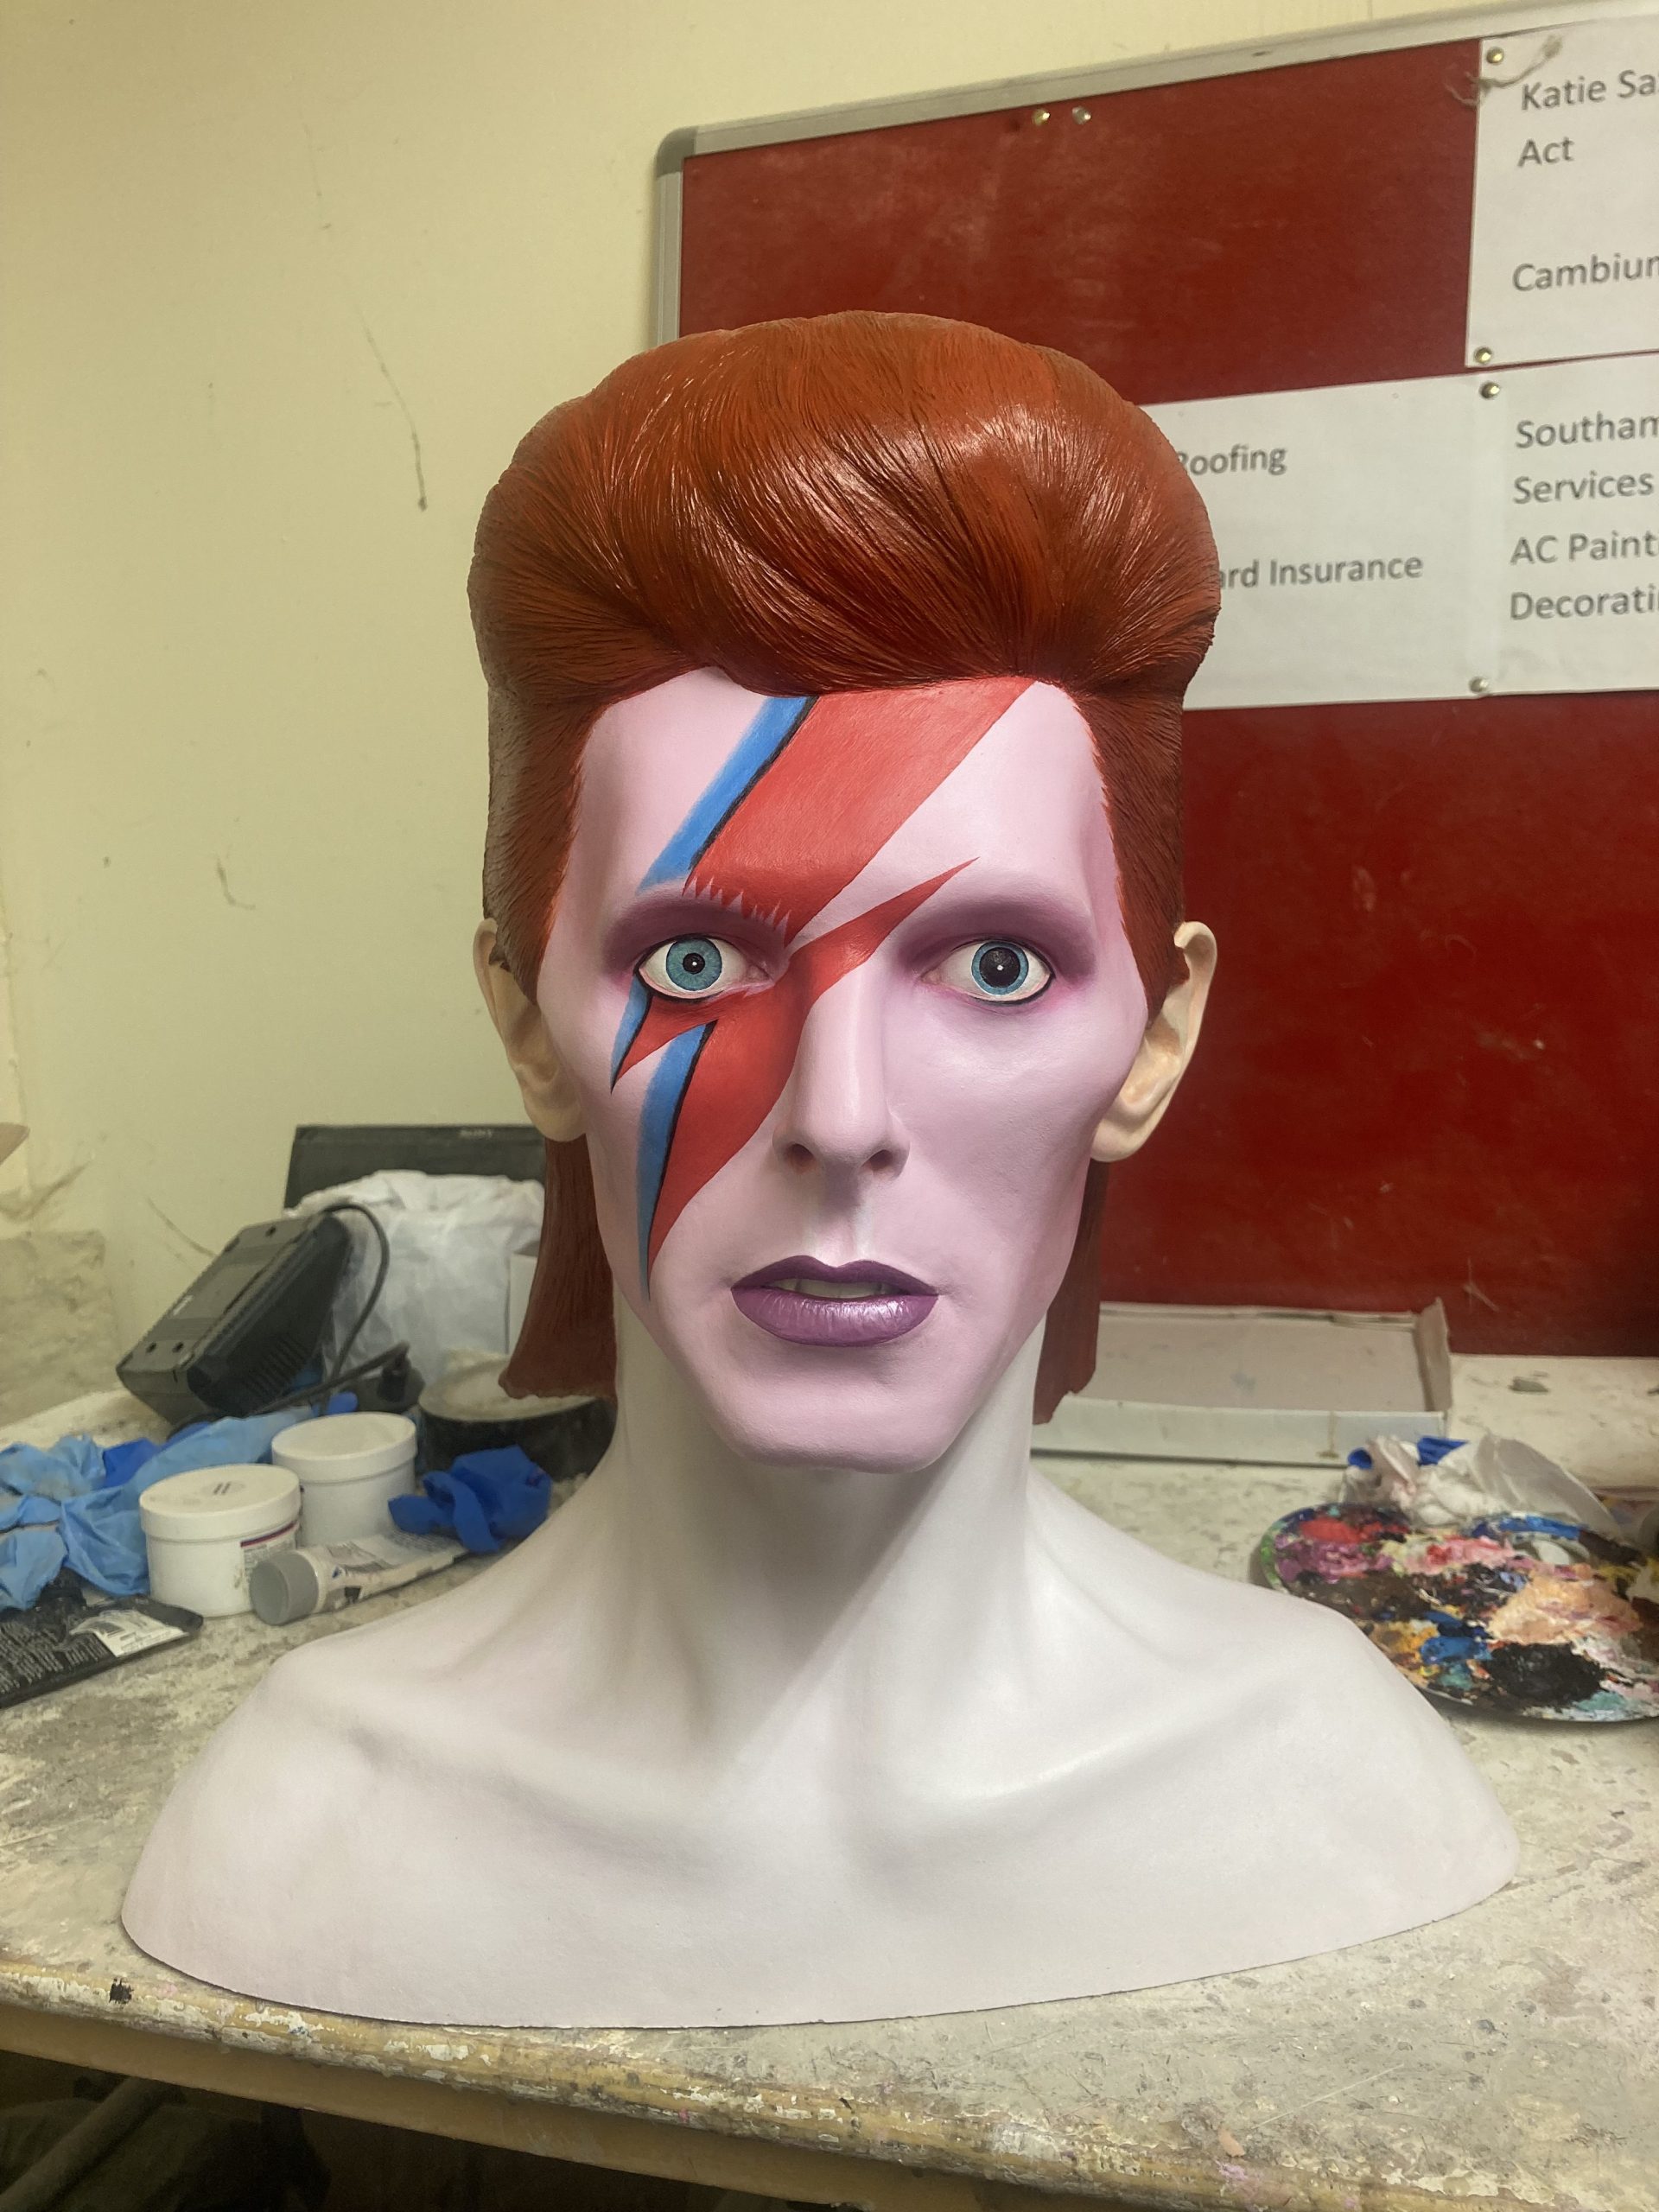 David Bowie model painted